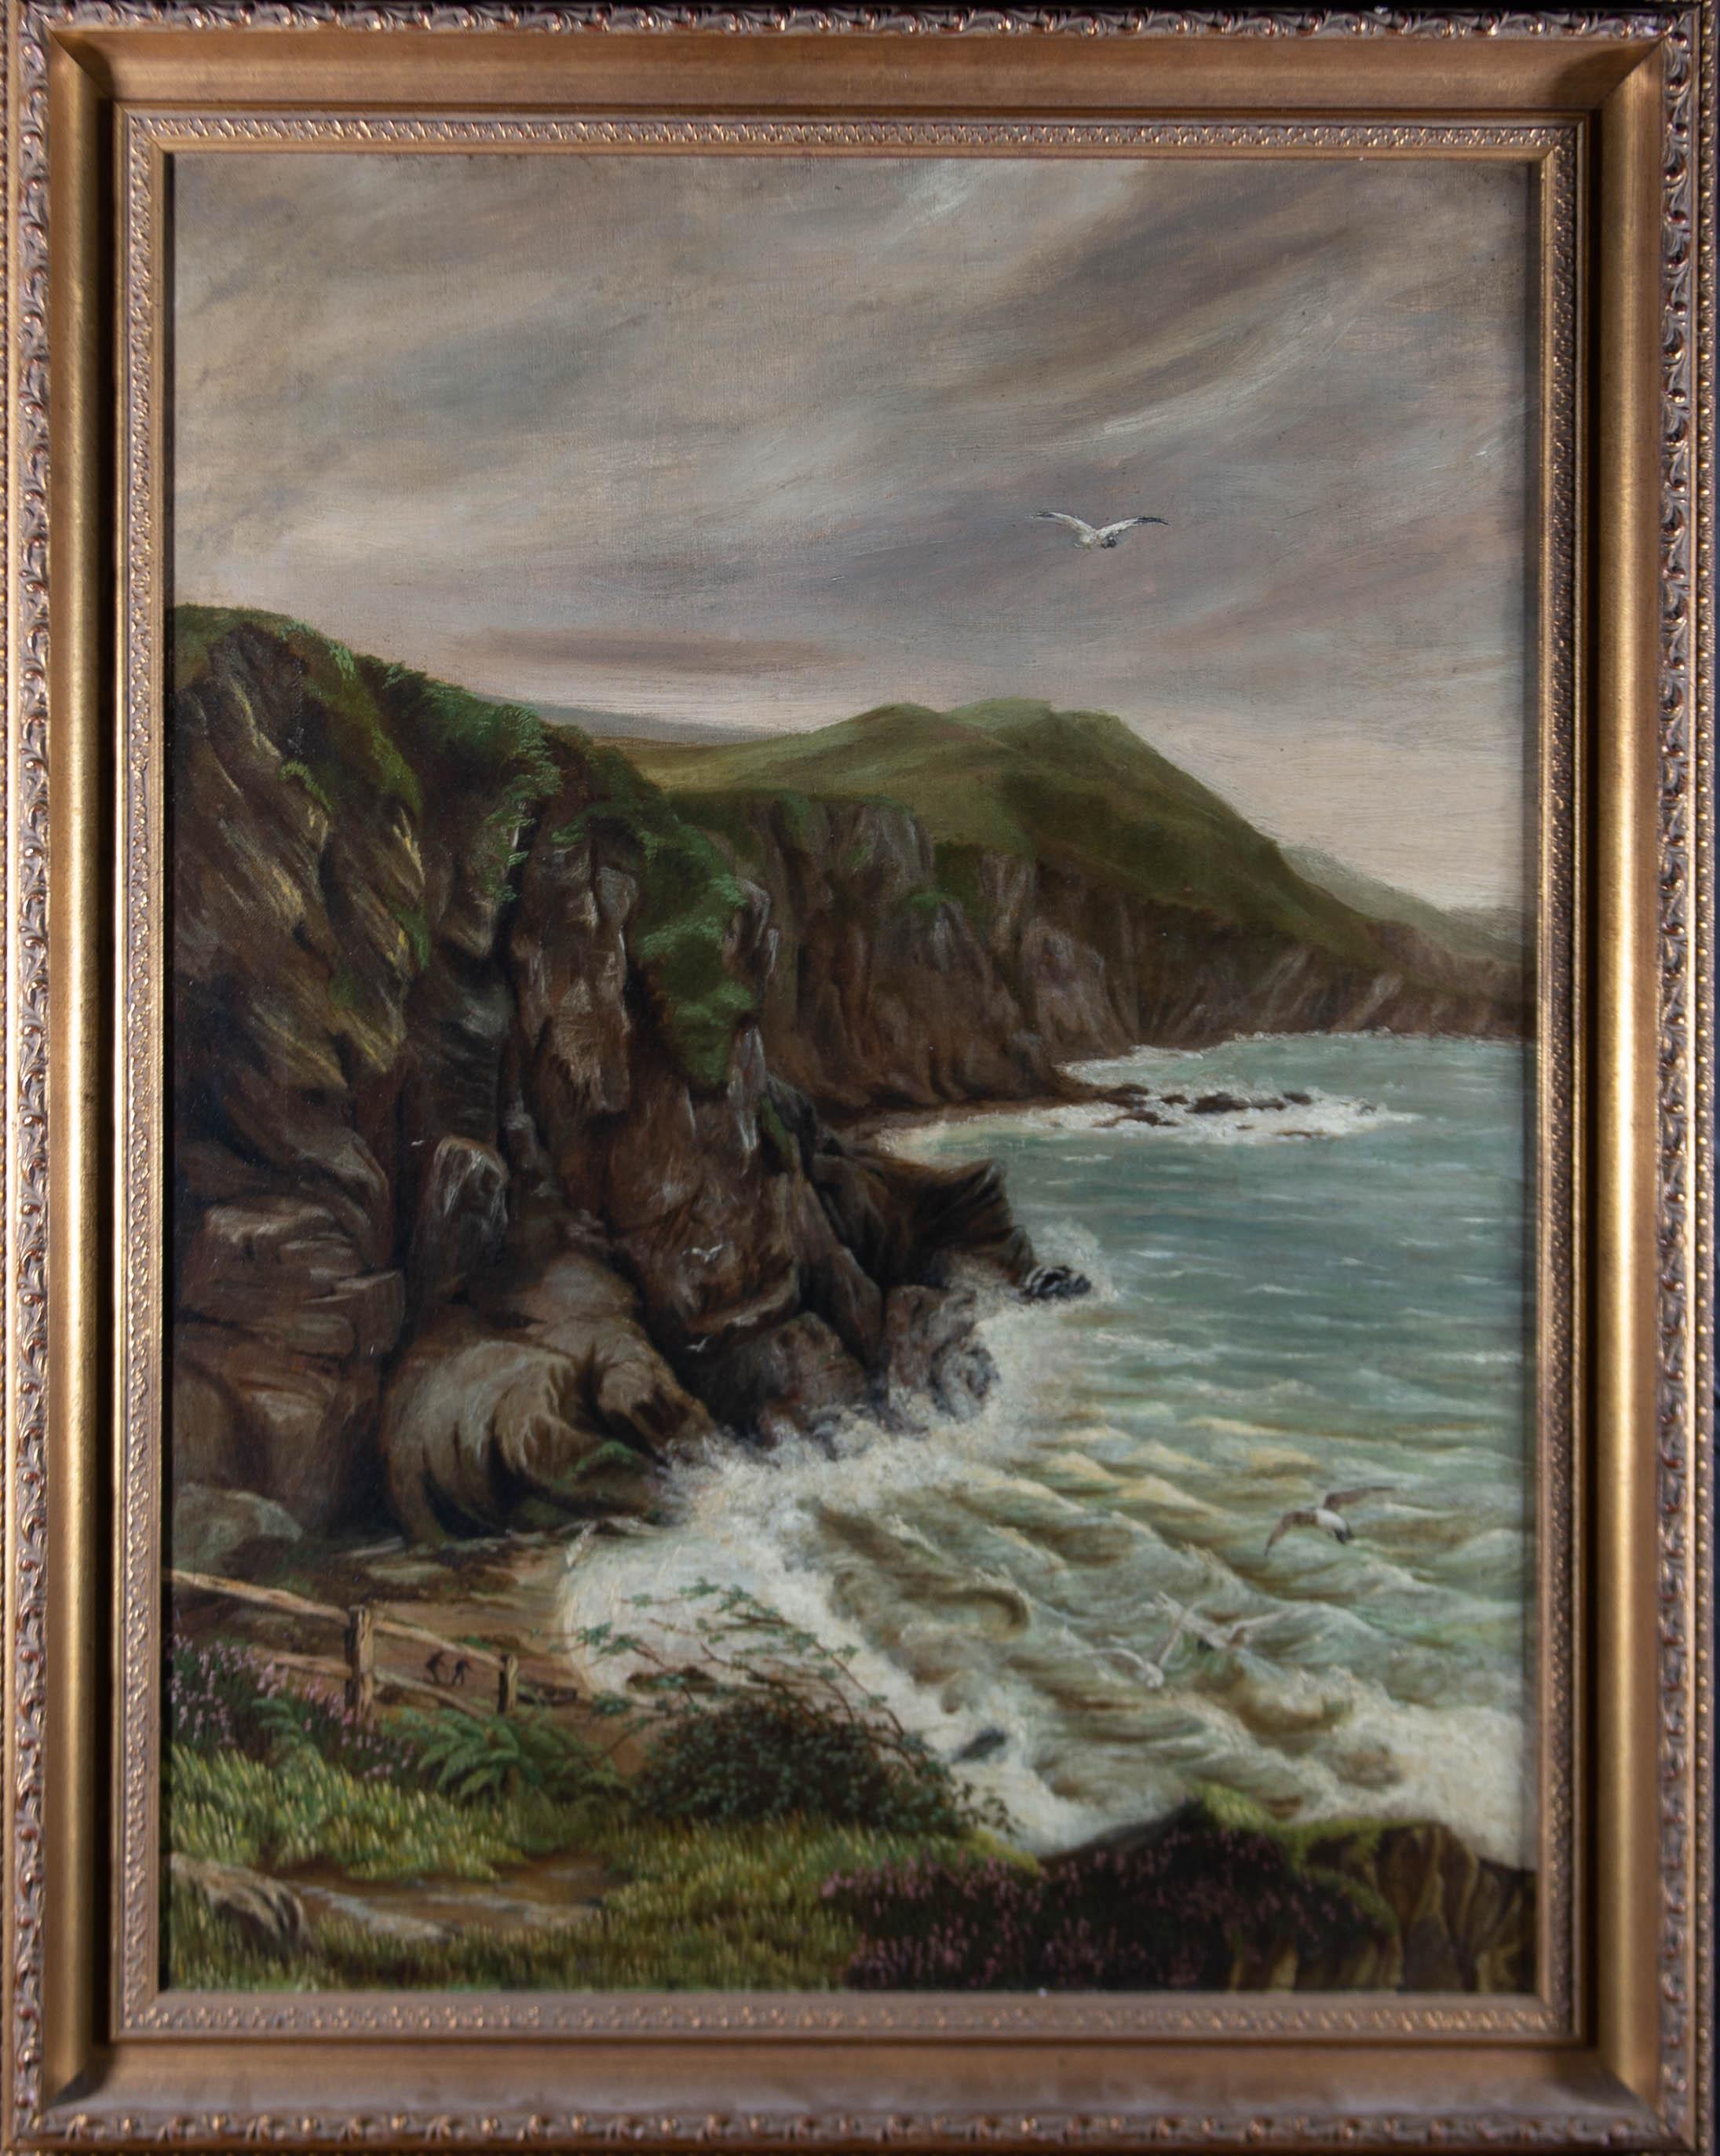 Unknown Figurative Painting - Late 19th Century Oil - Stormy Coastal Scene